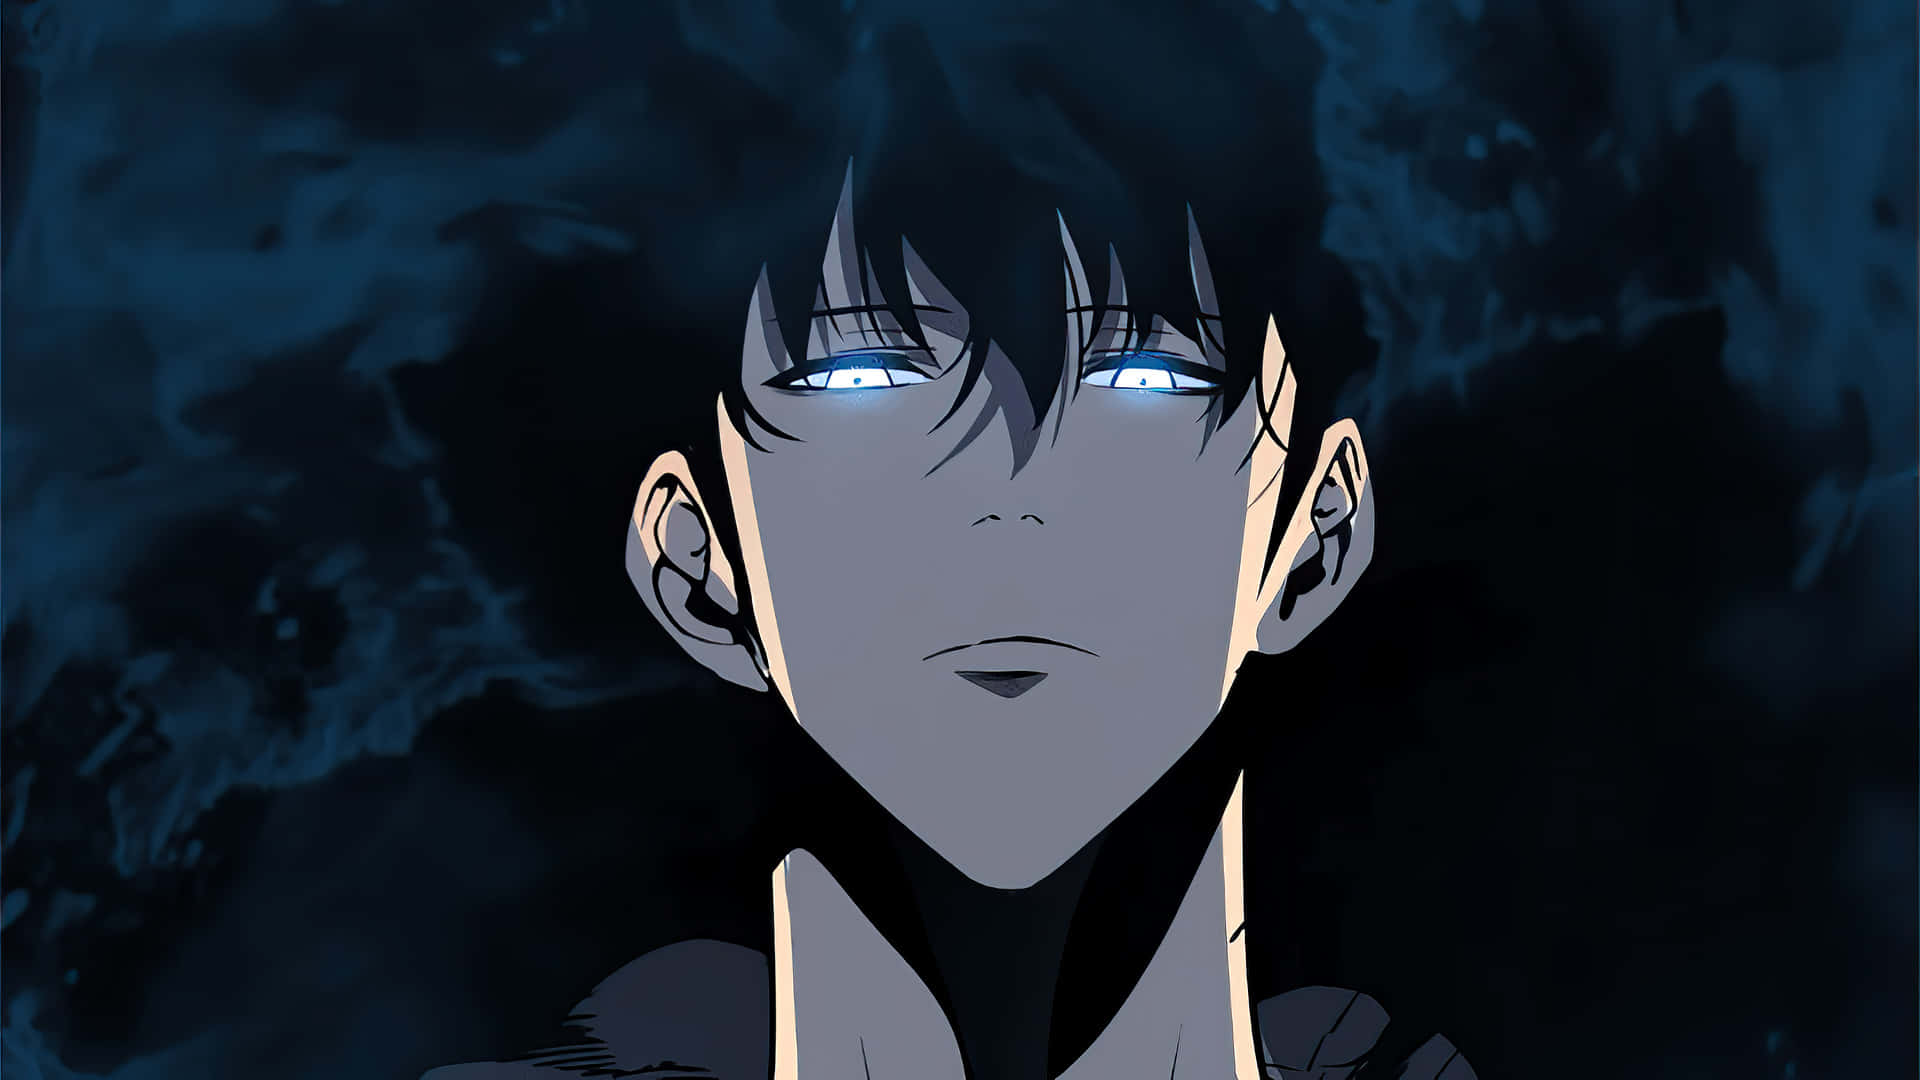 A Man With Blue Eyes And Black Hair